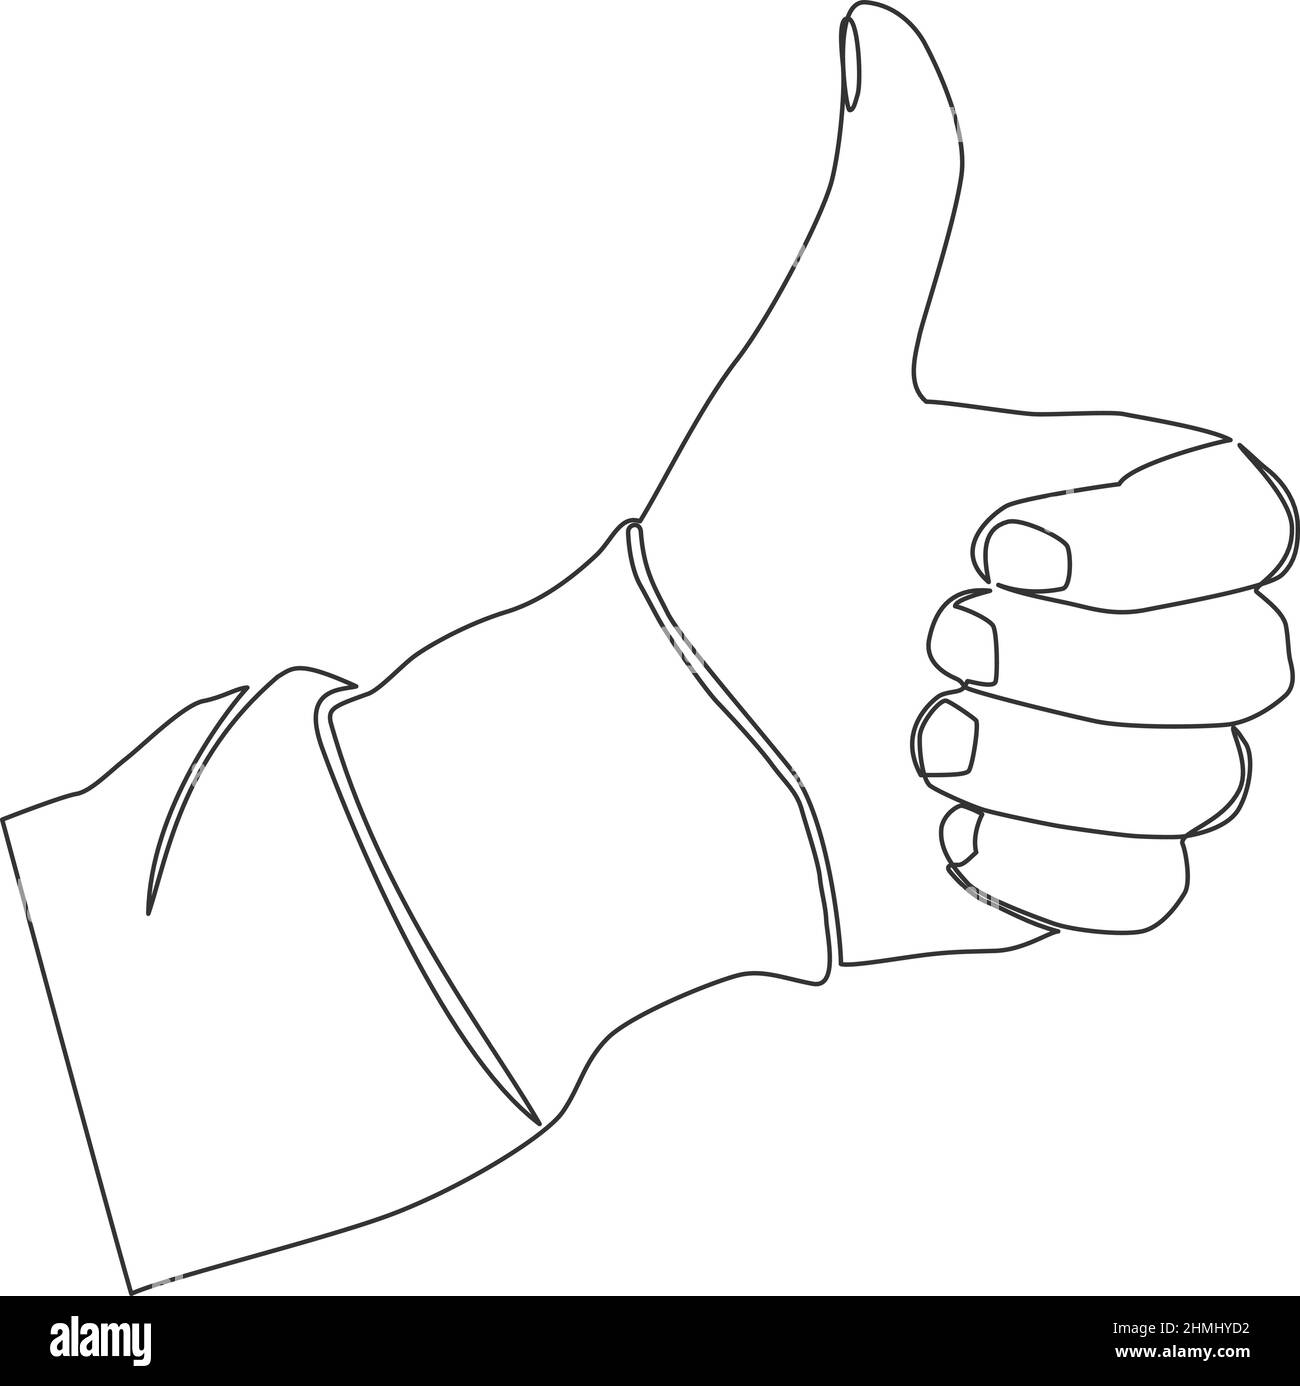 singe line drawing of hand doing thumbs up gesture, continuous line vector illustration Stock Vector